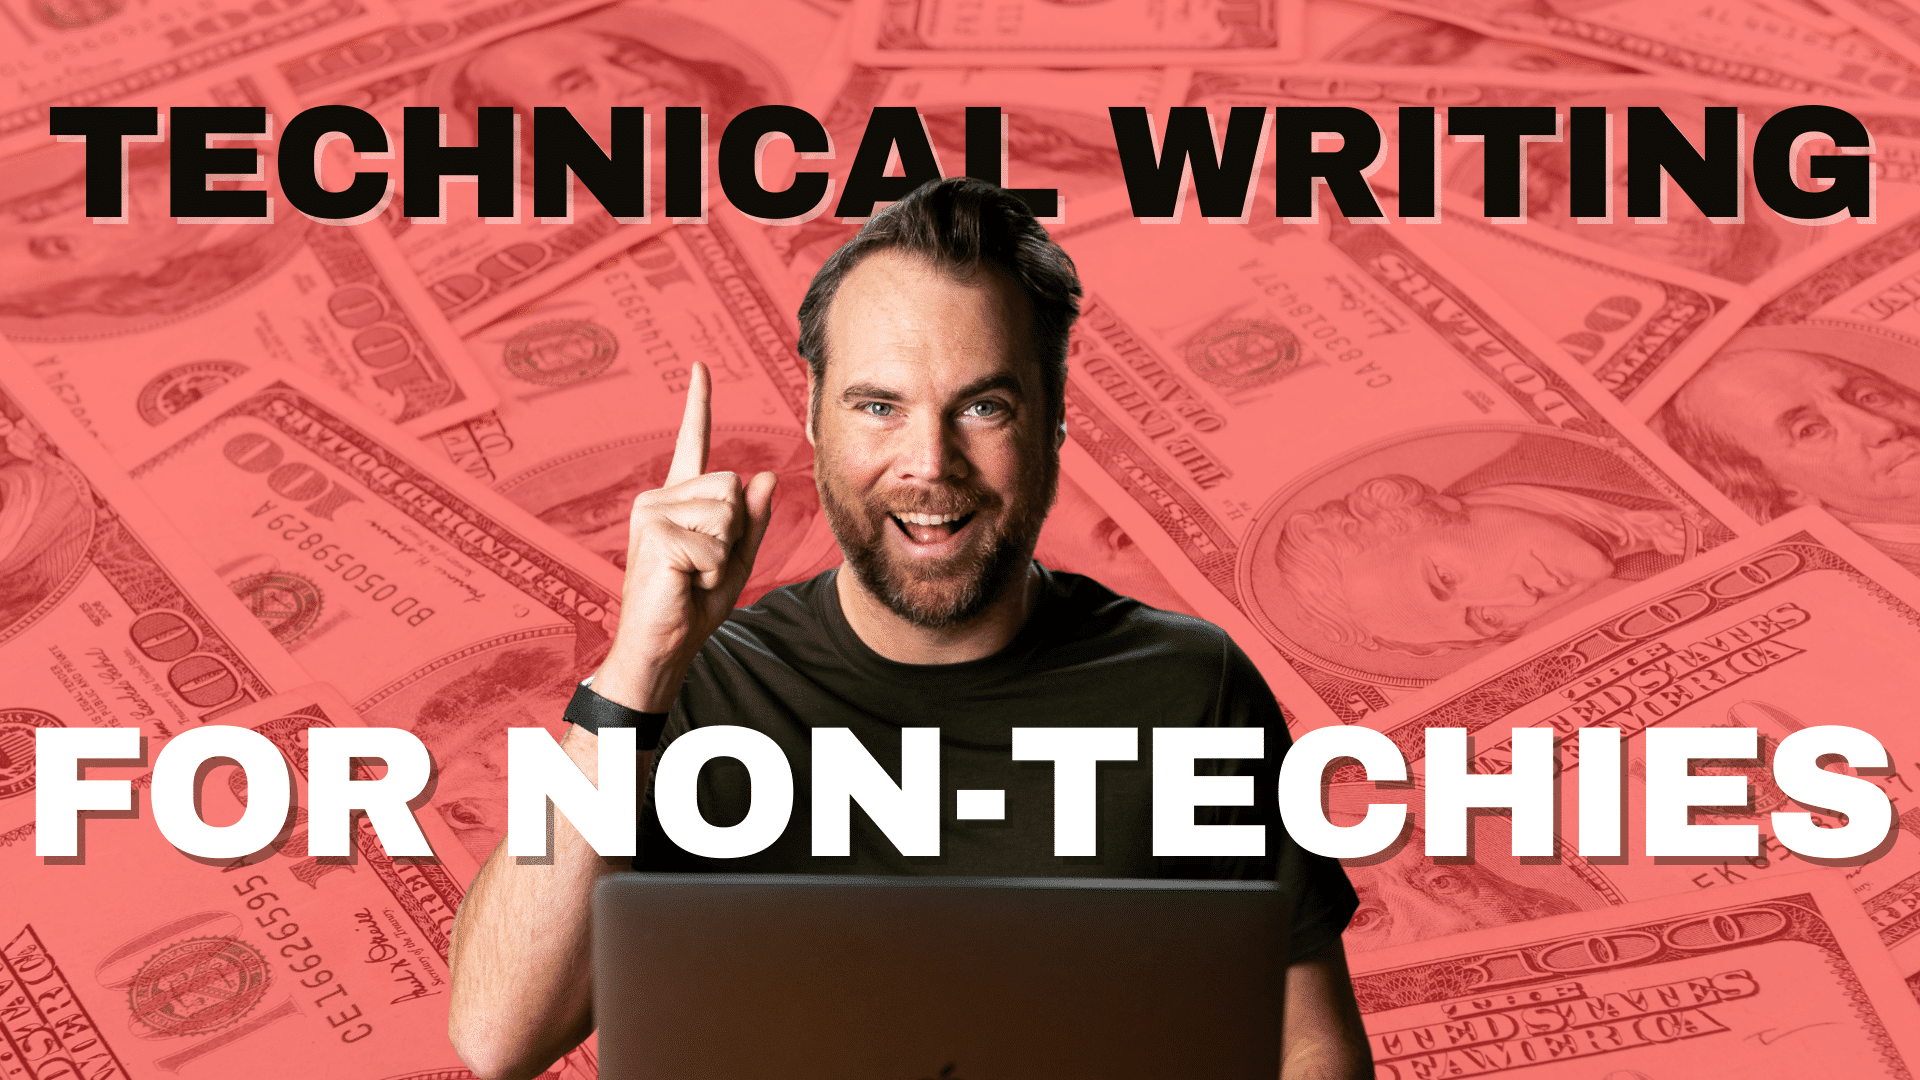 Everything You Need to Know to Start a Freelance Technical Writing Business(Even if You’re Not Technical!)